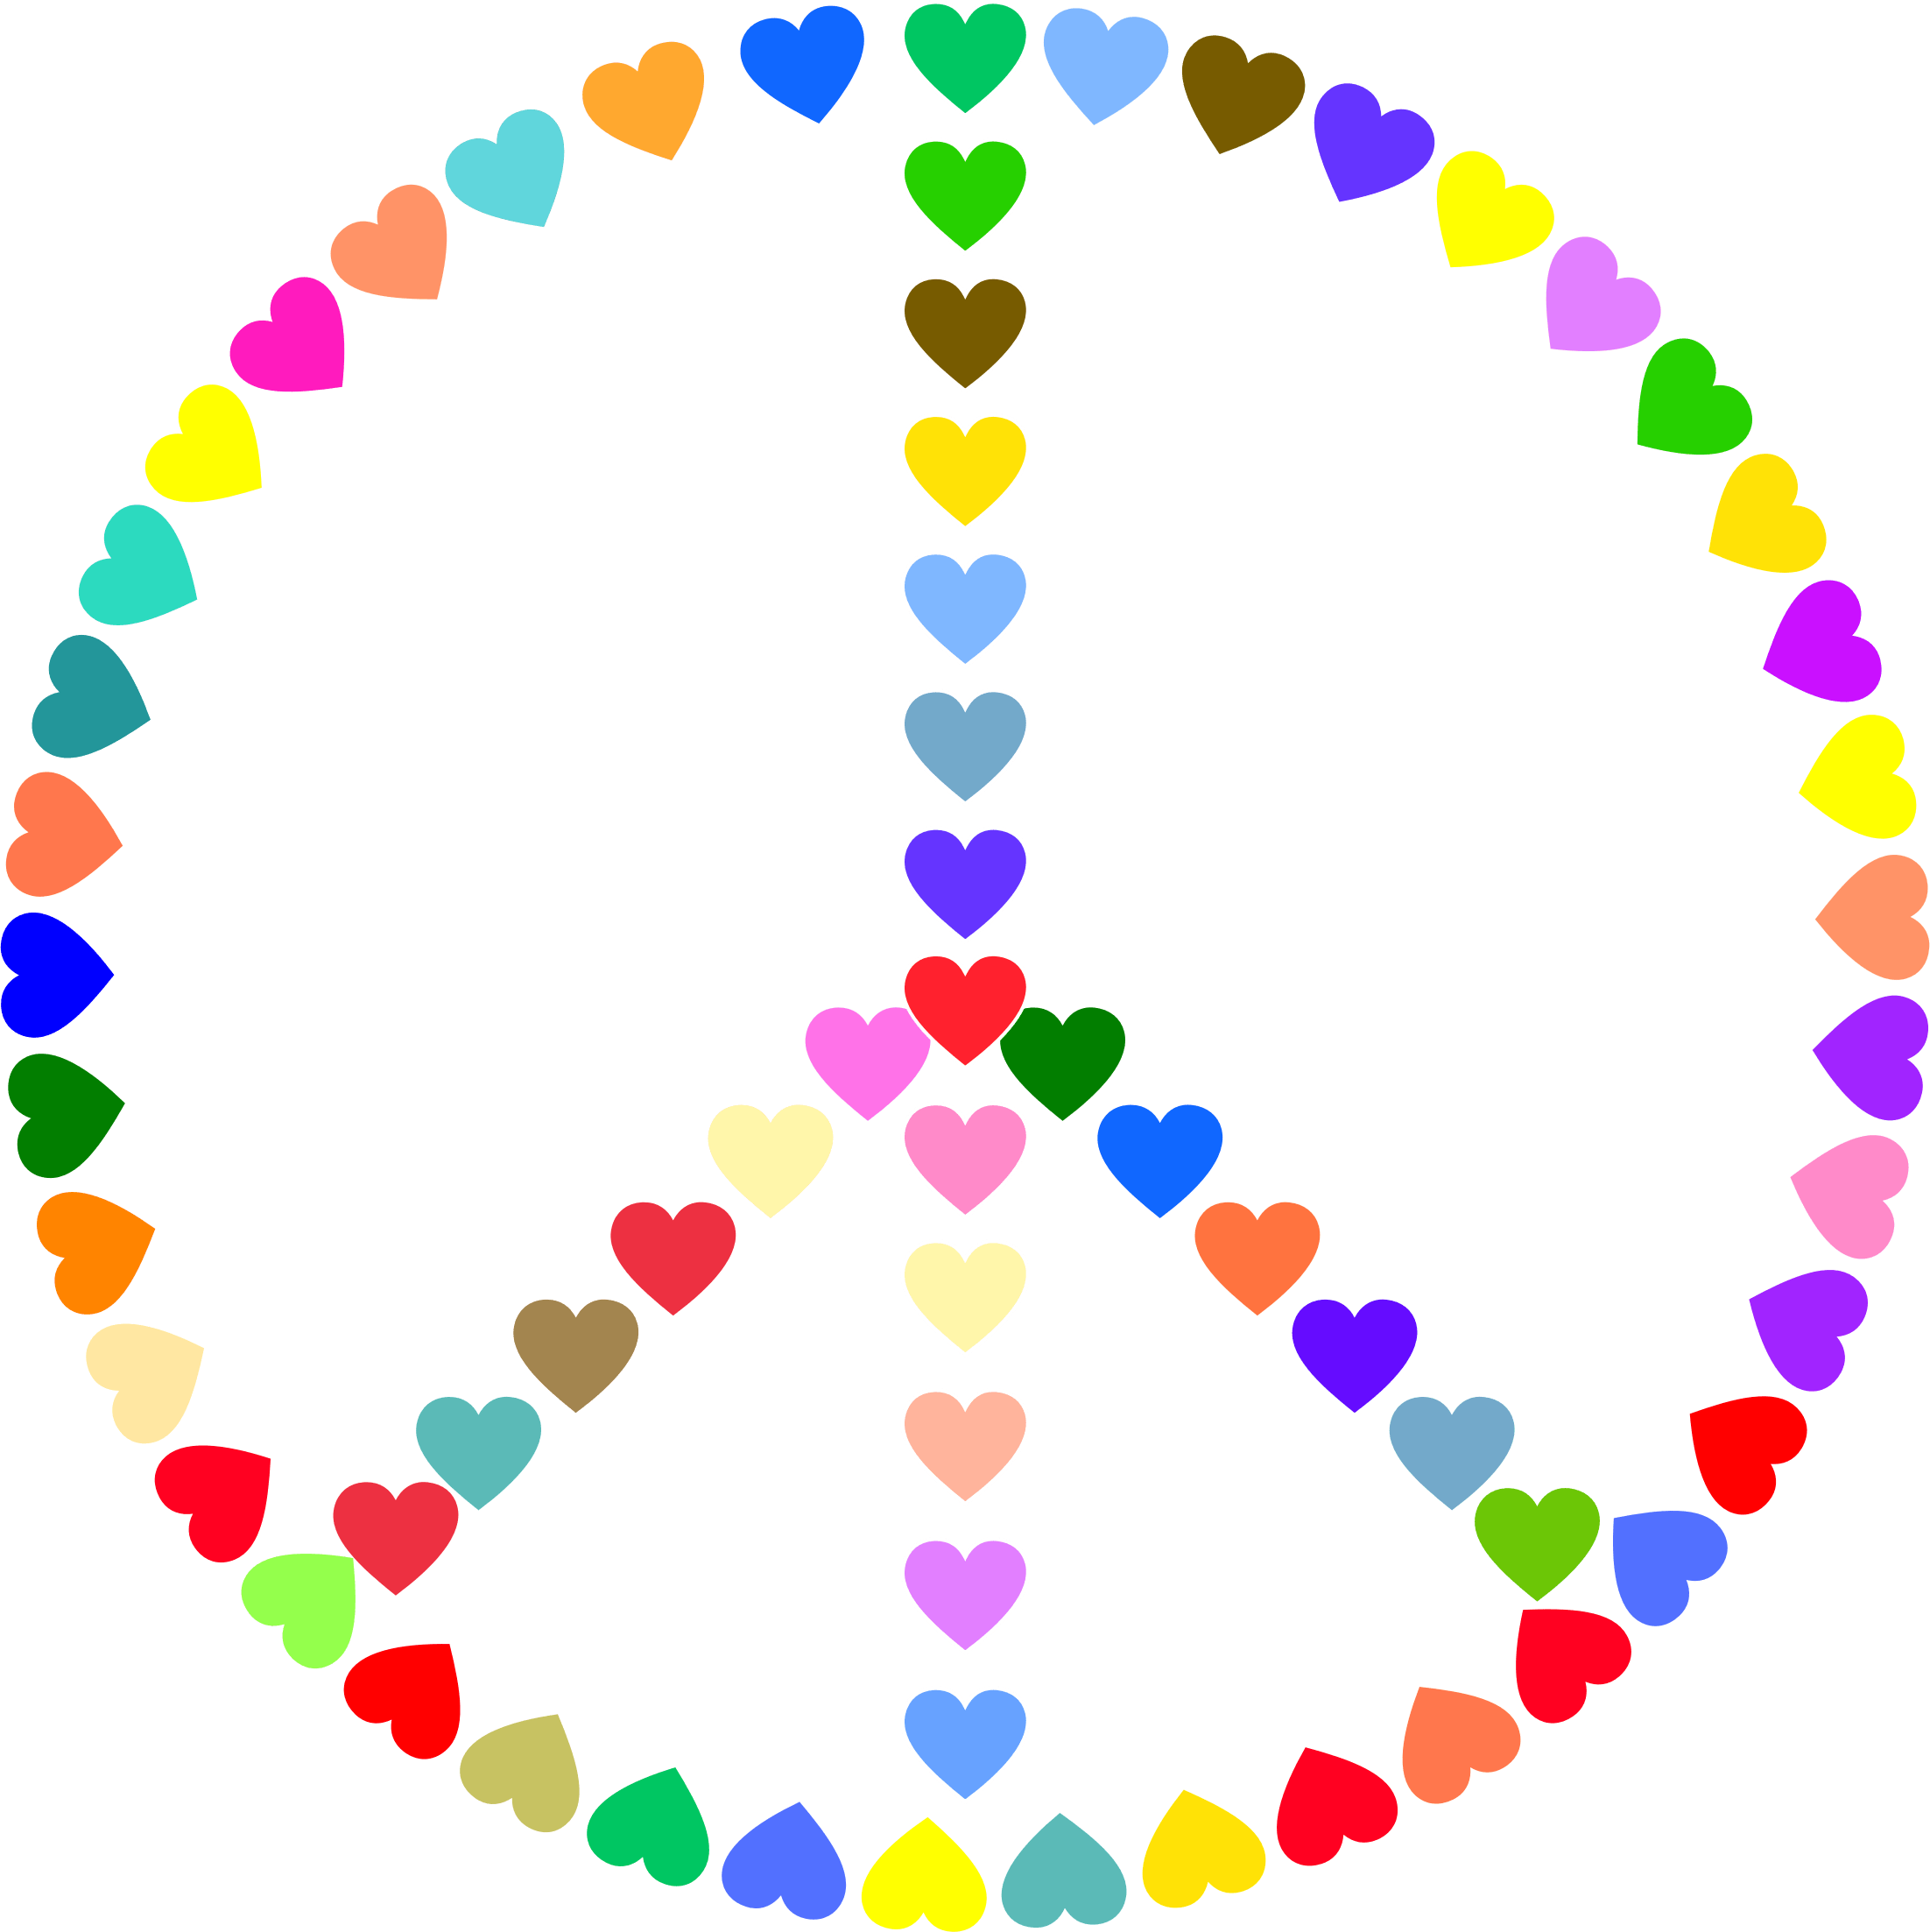 Peace Symbols Hippie Sign - Love And Peace Sign Round Ornament (2204x2206)